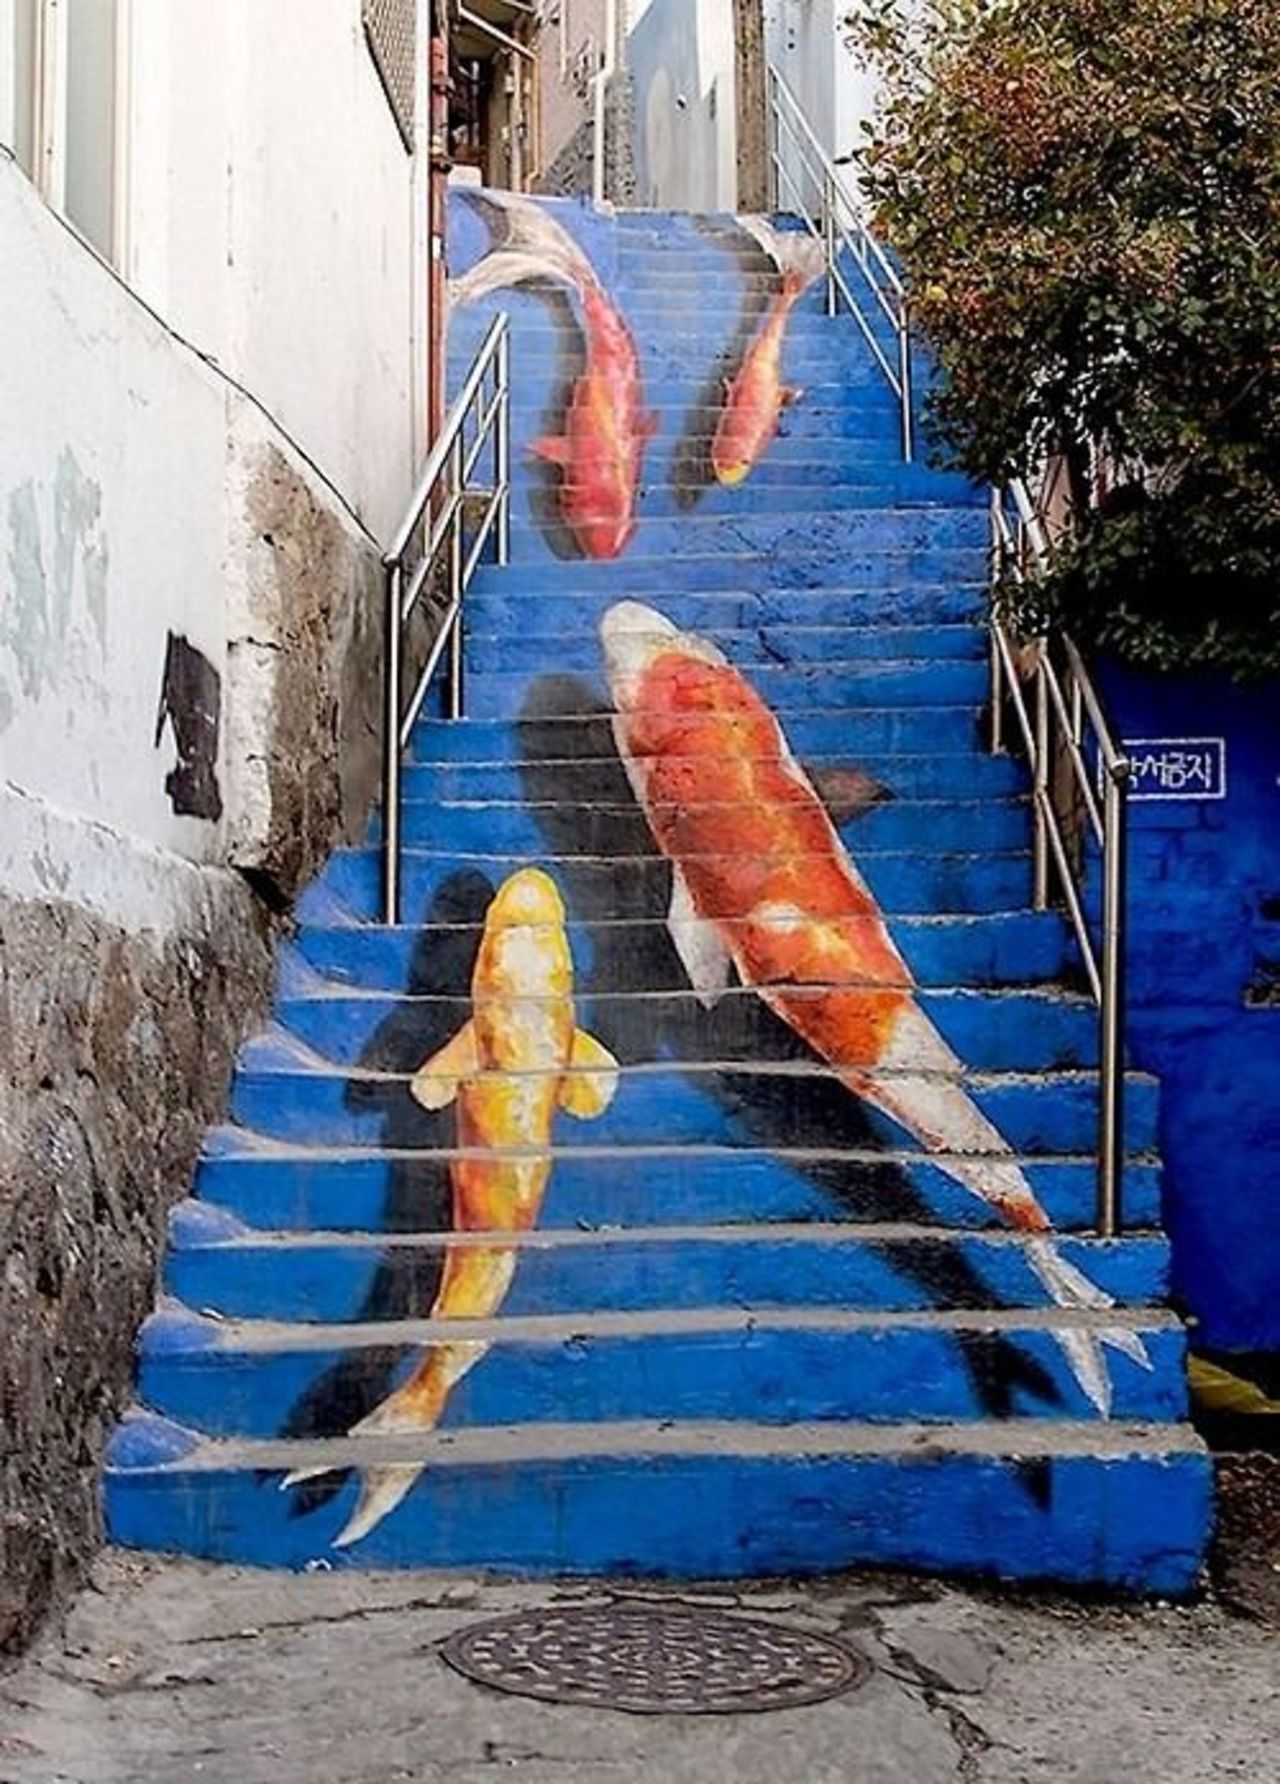 Street #Art #Graffiti: "Swimming to the Surface" Koi fish steps in #Seoul, South Korea Photo by Kevin Lowry. http://t.co/2nDS0w80jg